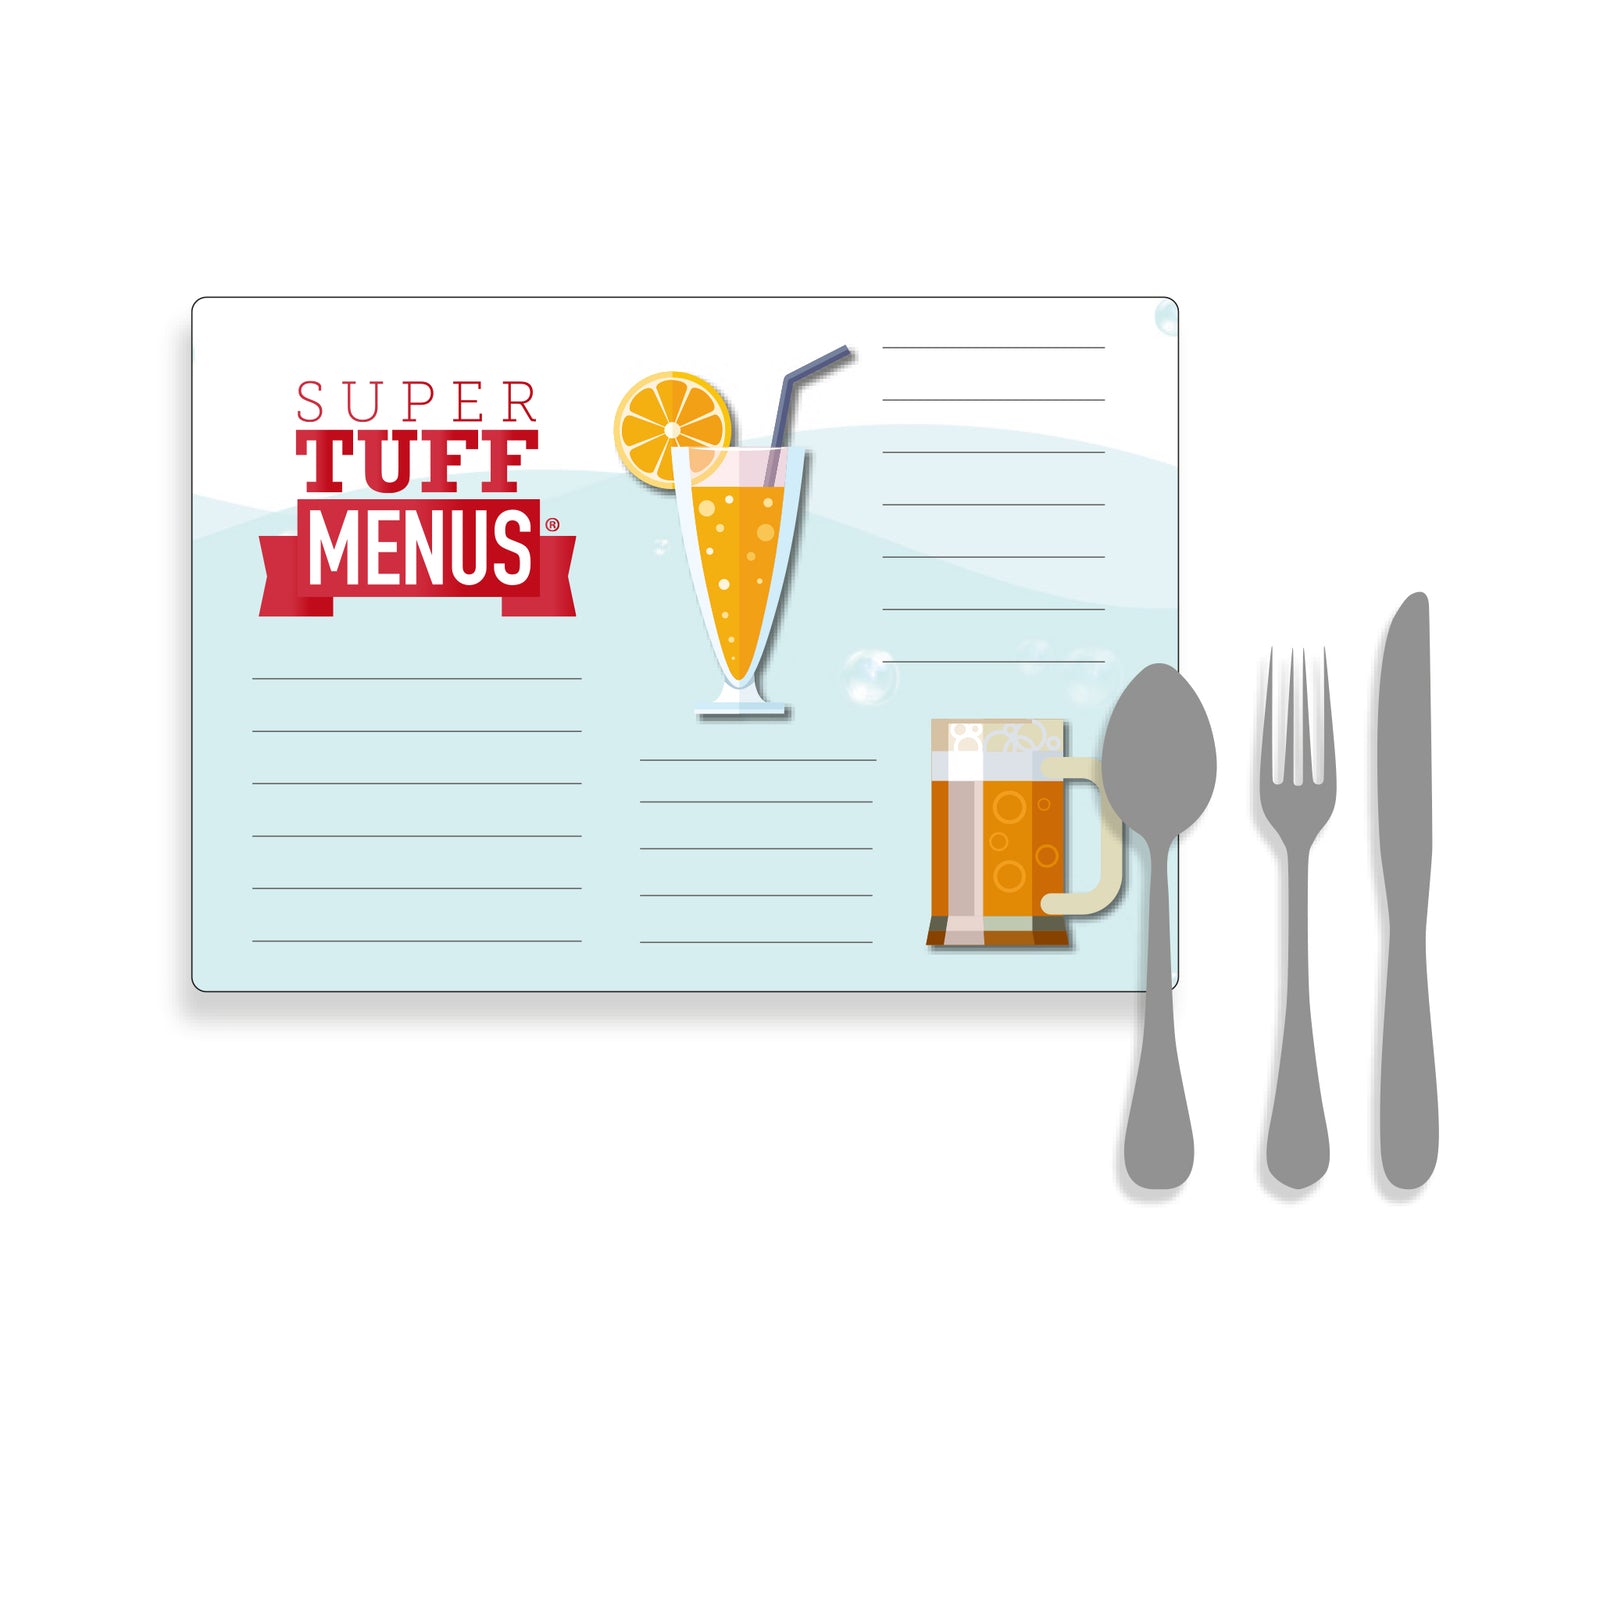 Landscape Legal sized illustration of a menu with cutlery to give a size context